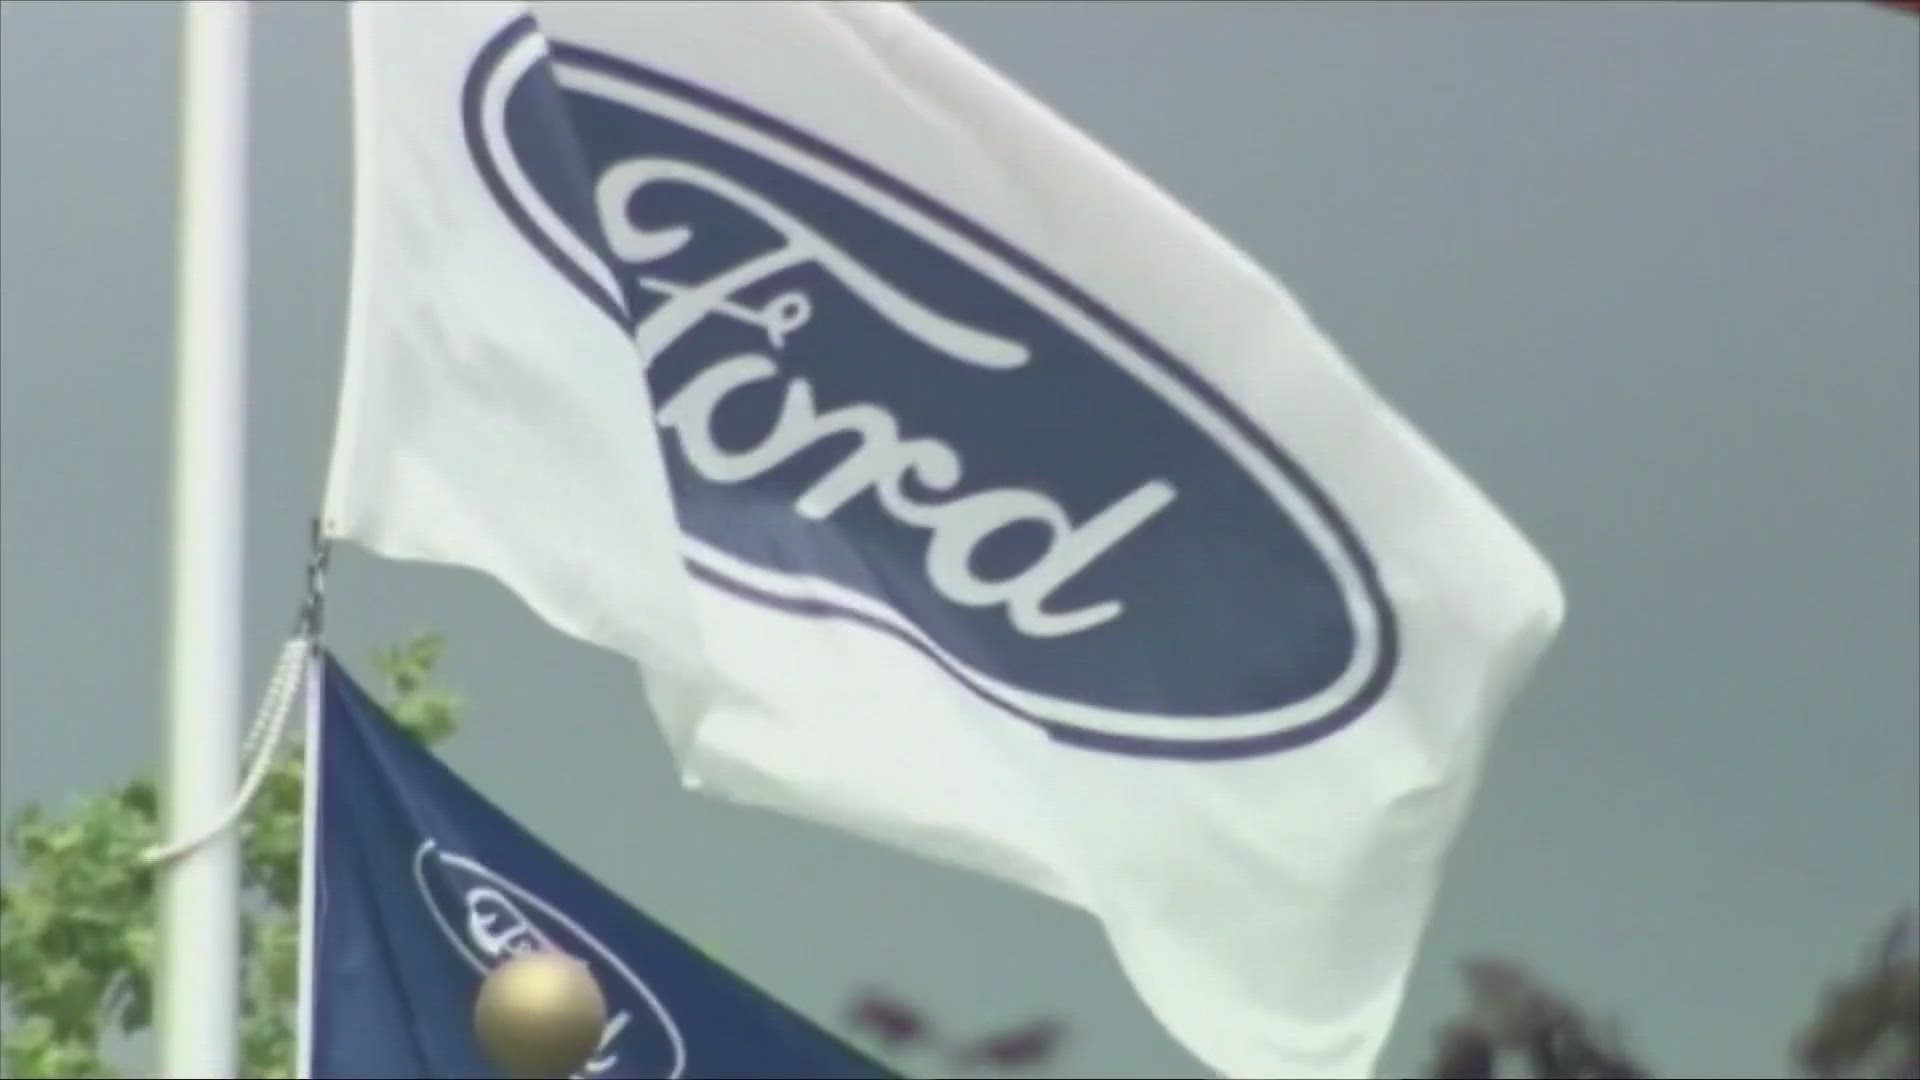 Ford is recalling more than a million vehicles in the U.S. in two actions to fix leaky brake hoses and windshield wiper arms that can break.